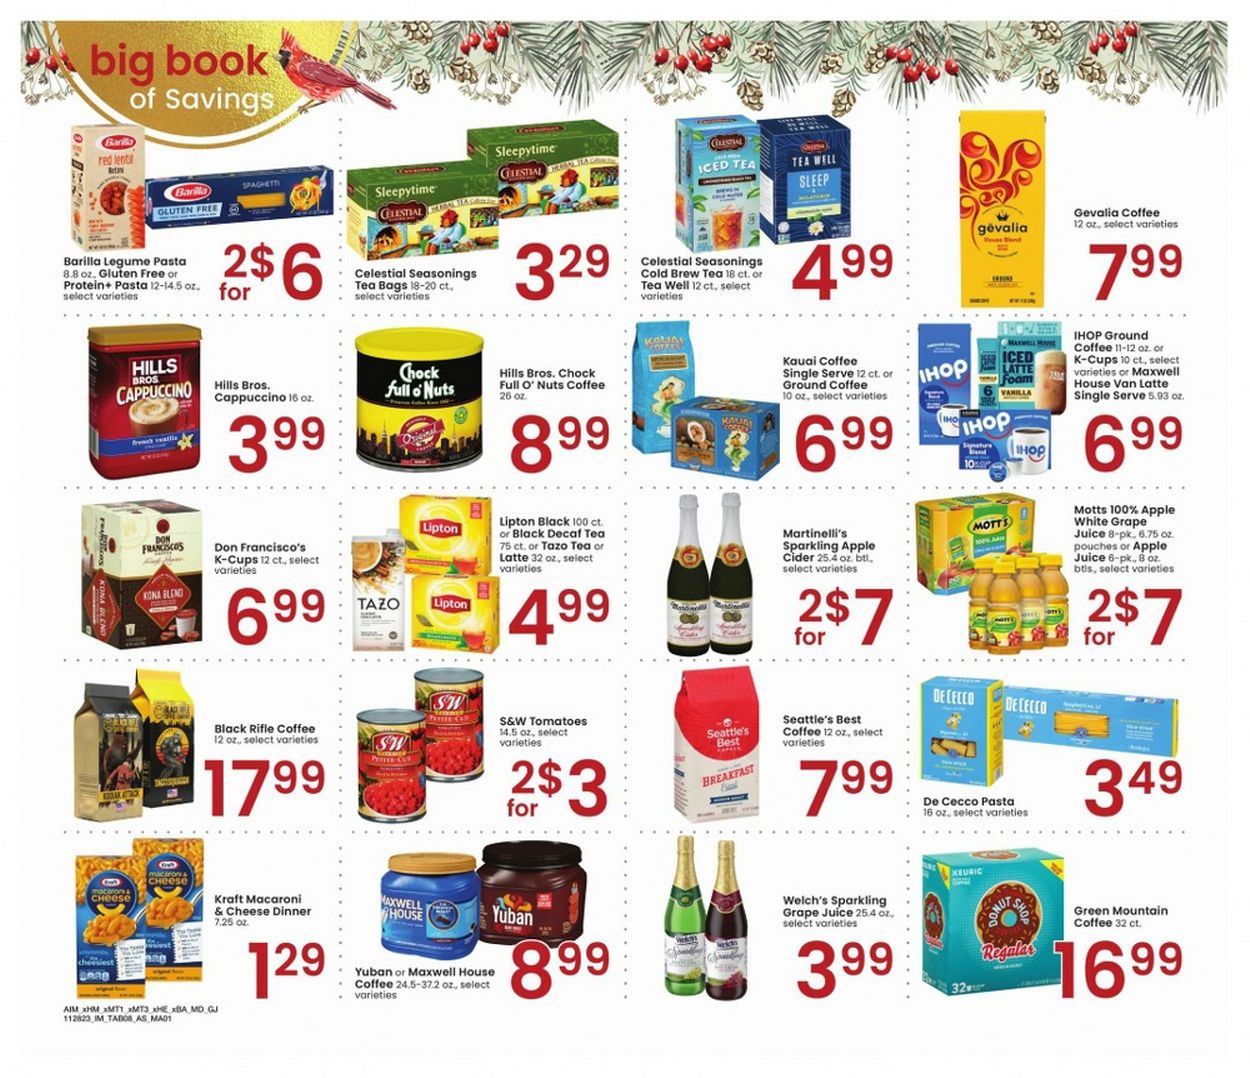 Albertsons July 2024 Weekly Sales, Deals, Discounts and Digital Coupons.